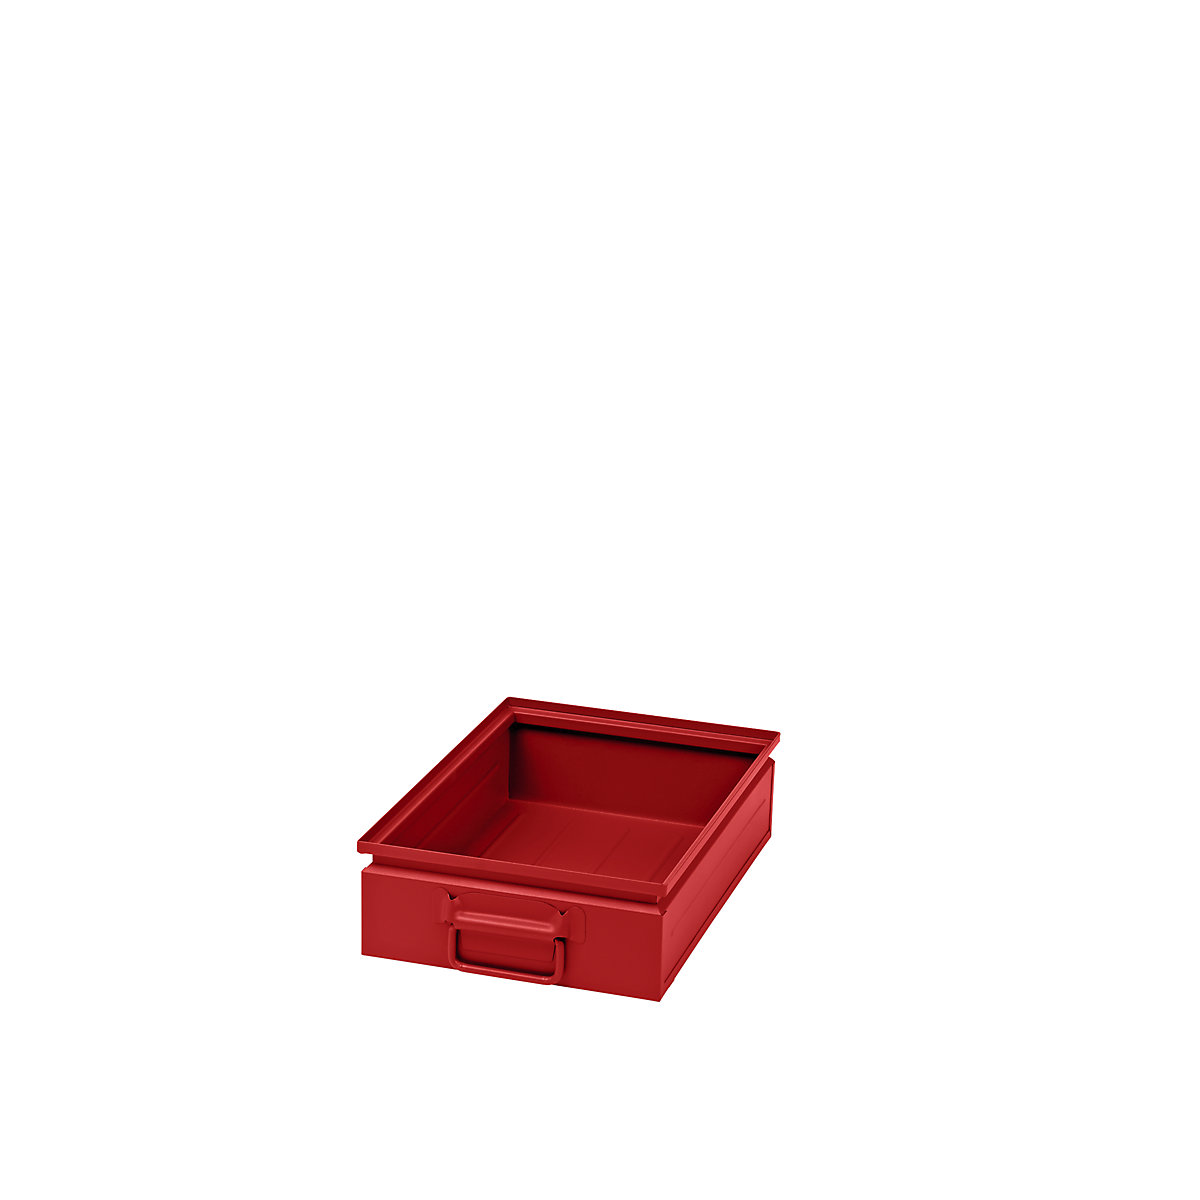 Stacking container made of sheet steel, capacity approx. 15 l, flame red RAL 3000-6